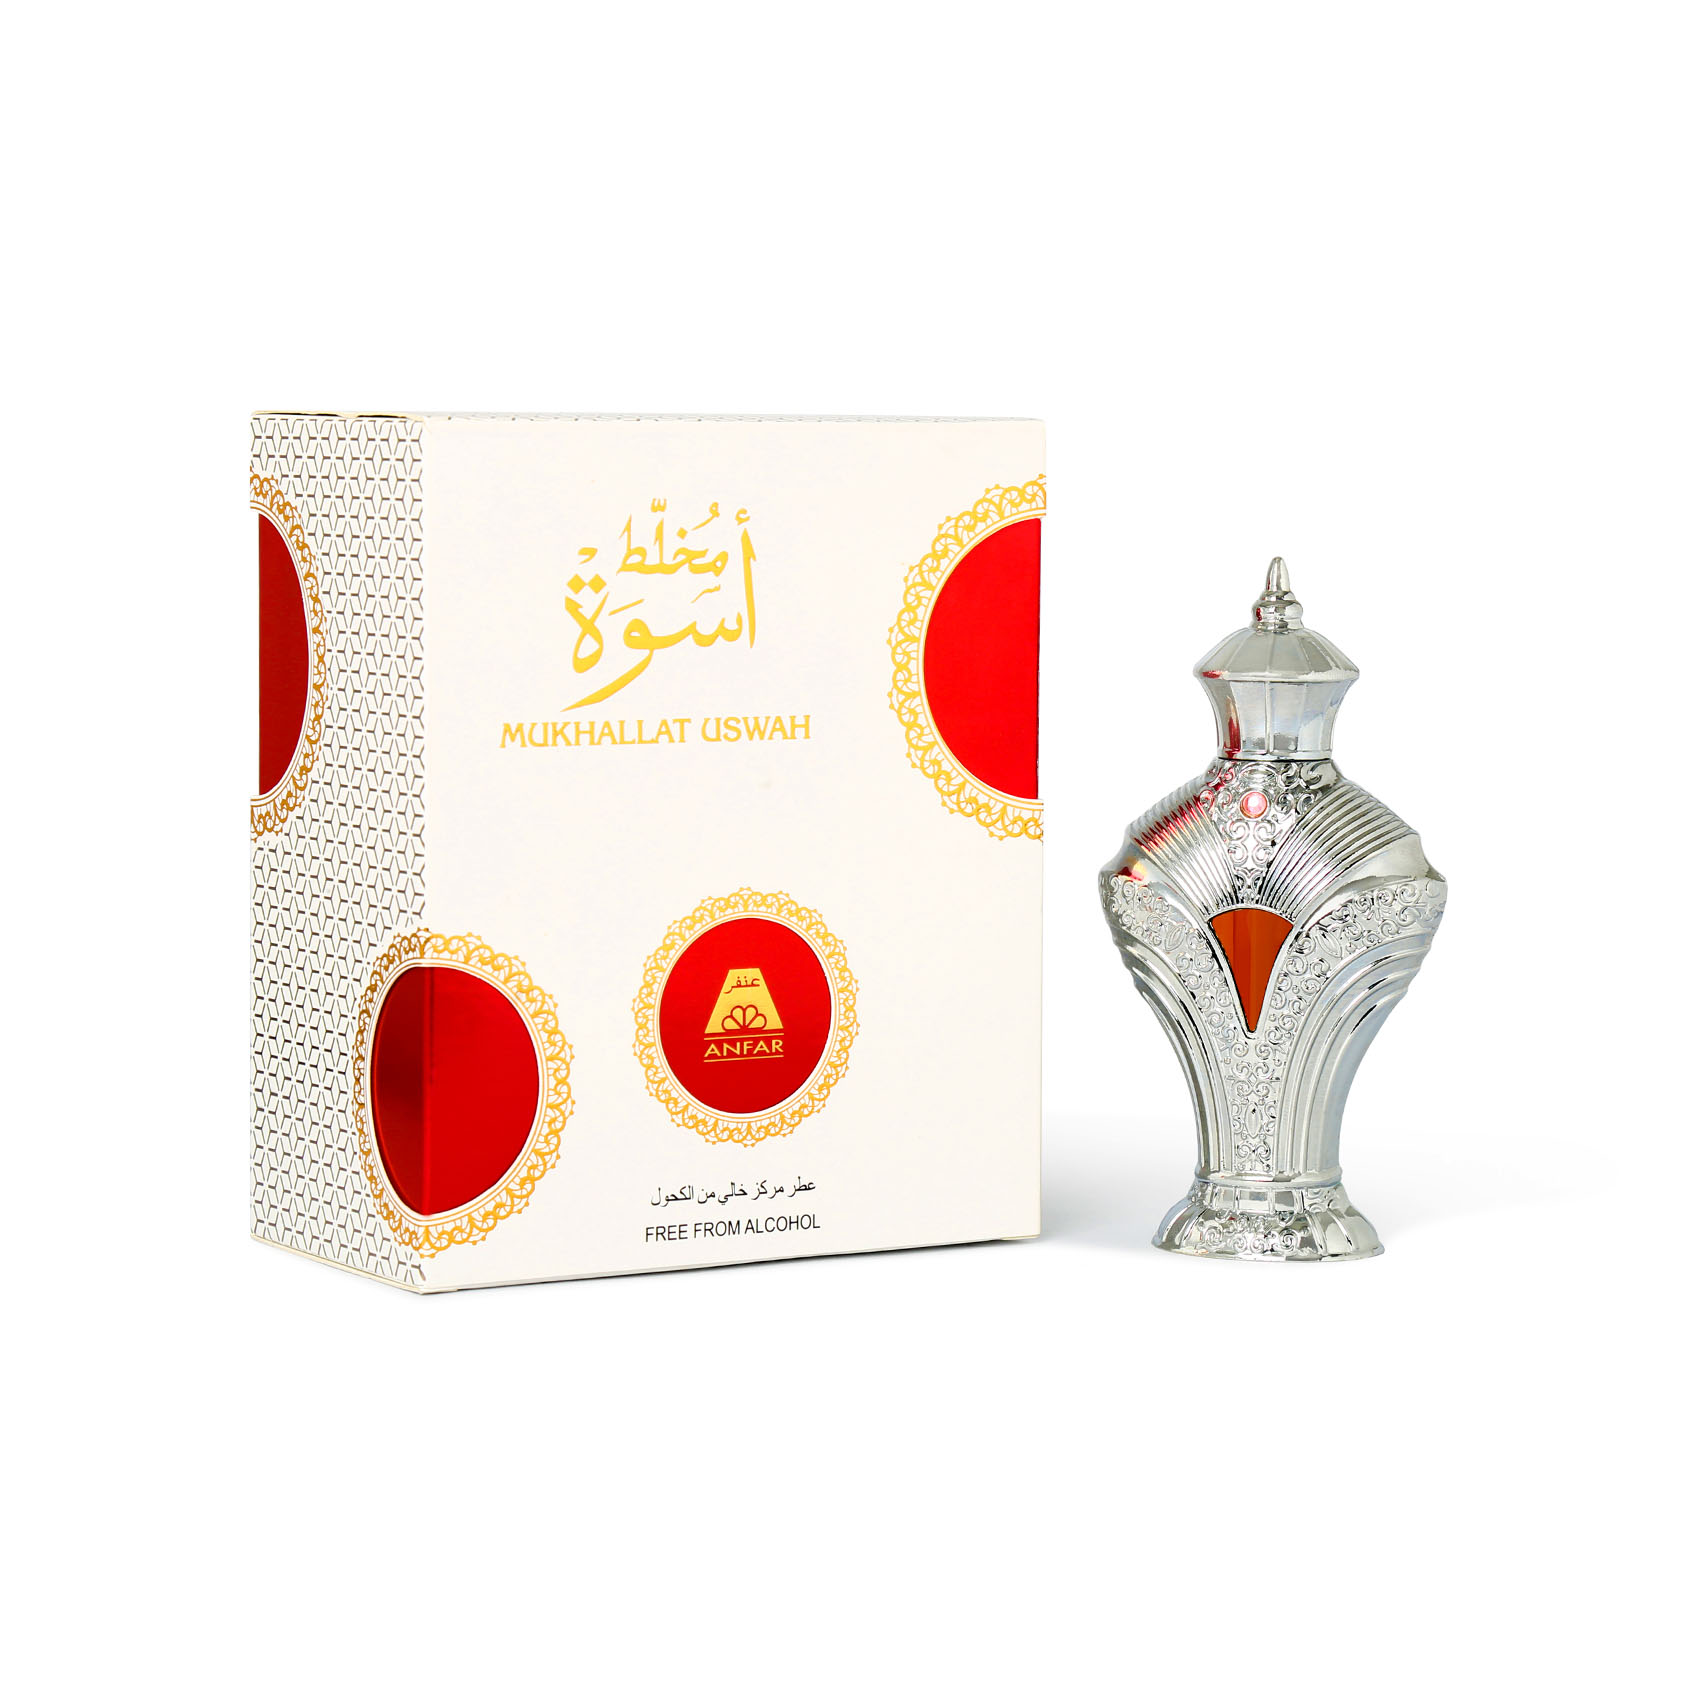 Mukhallat Uswah Concentrated Perfume Free From Alcohol 15ml For Men & Women  By Anfar- Made In Dubai